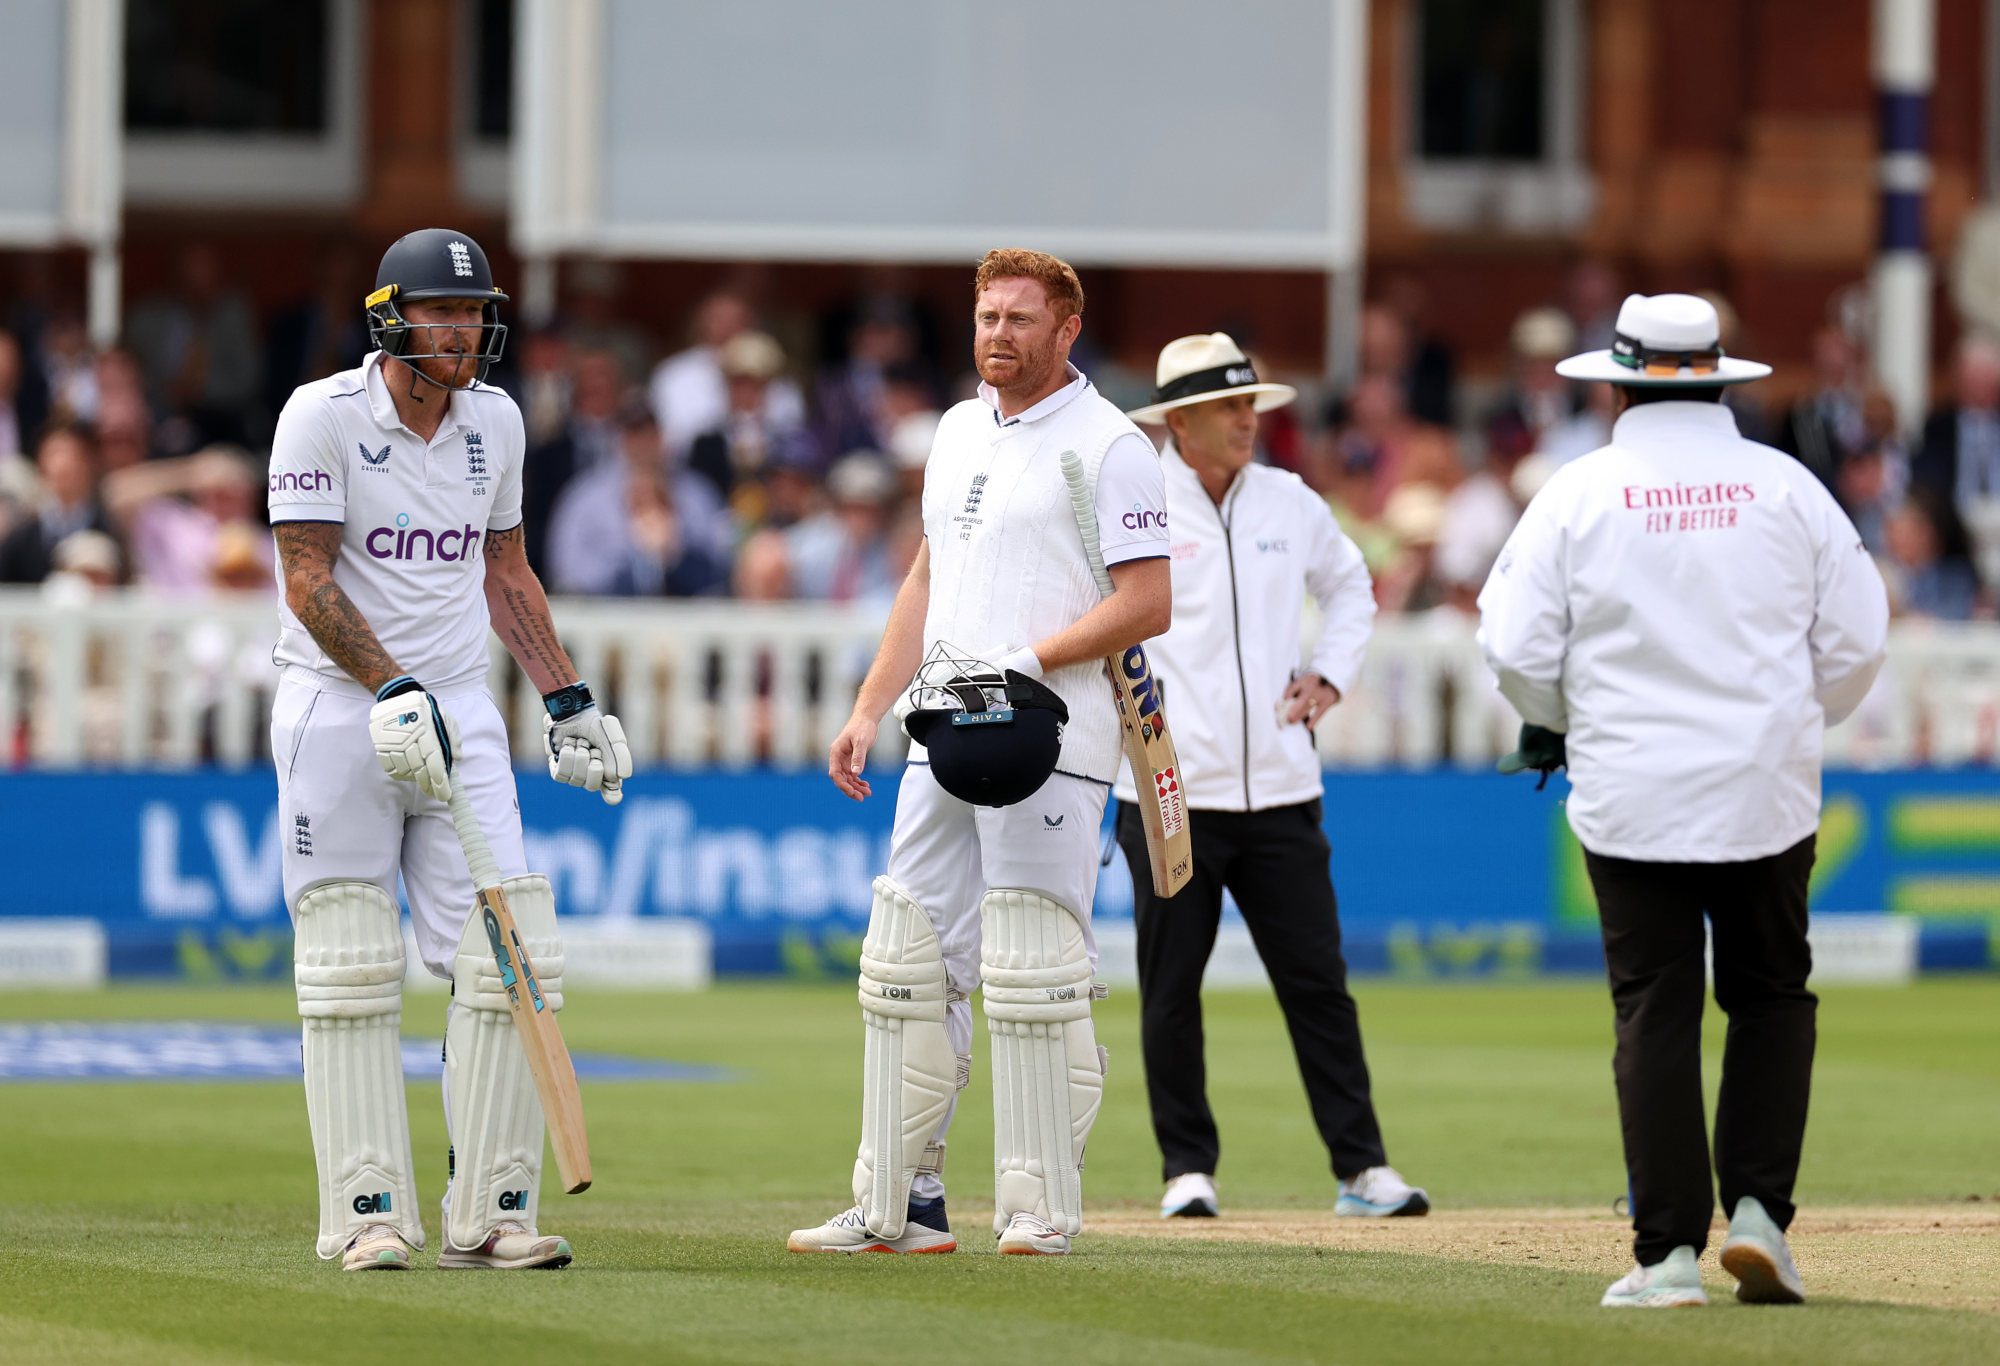 Ben Stokes speaks to the umpires after Jonny Bairstow was run out.